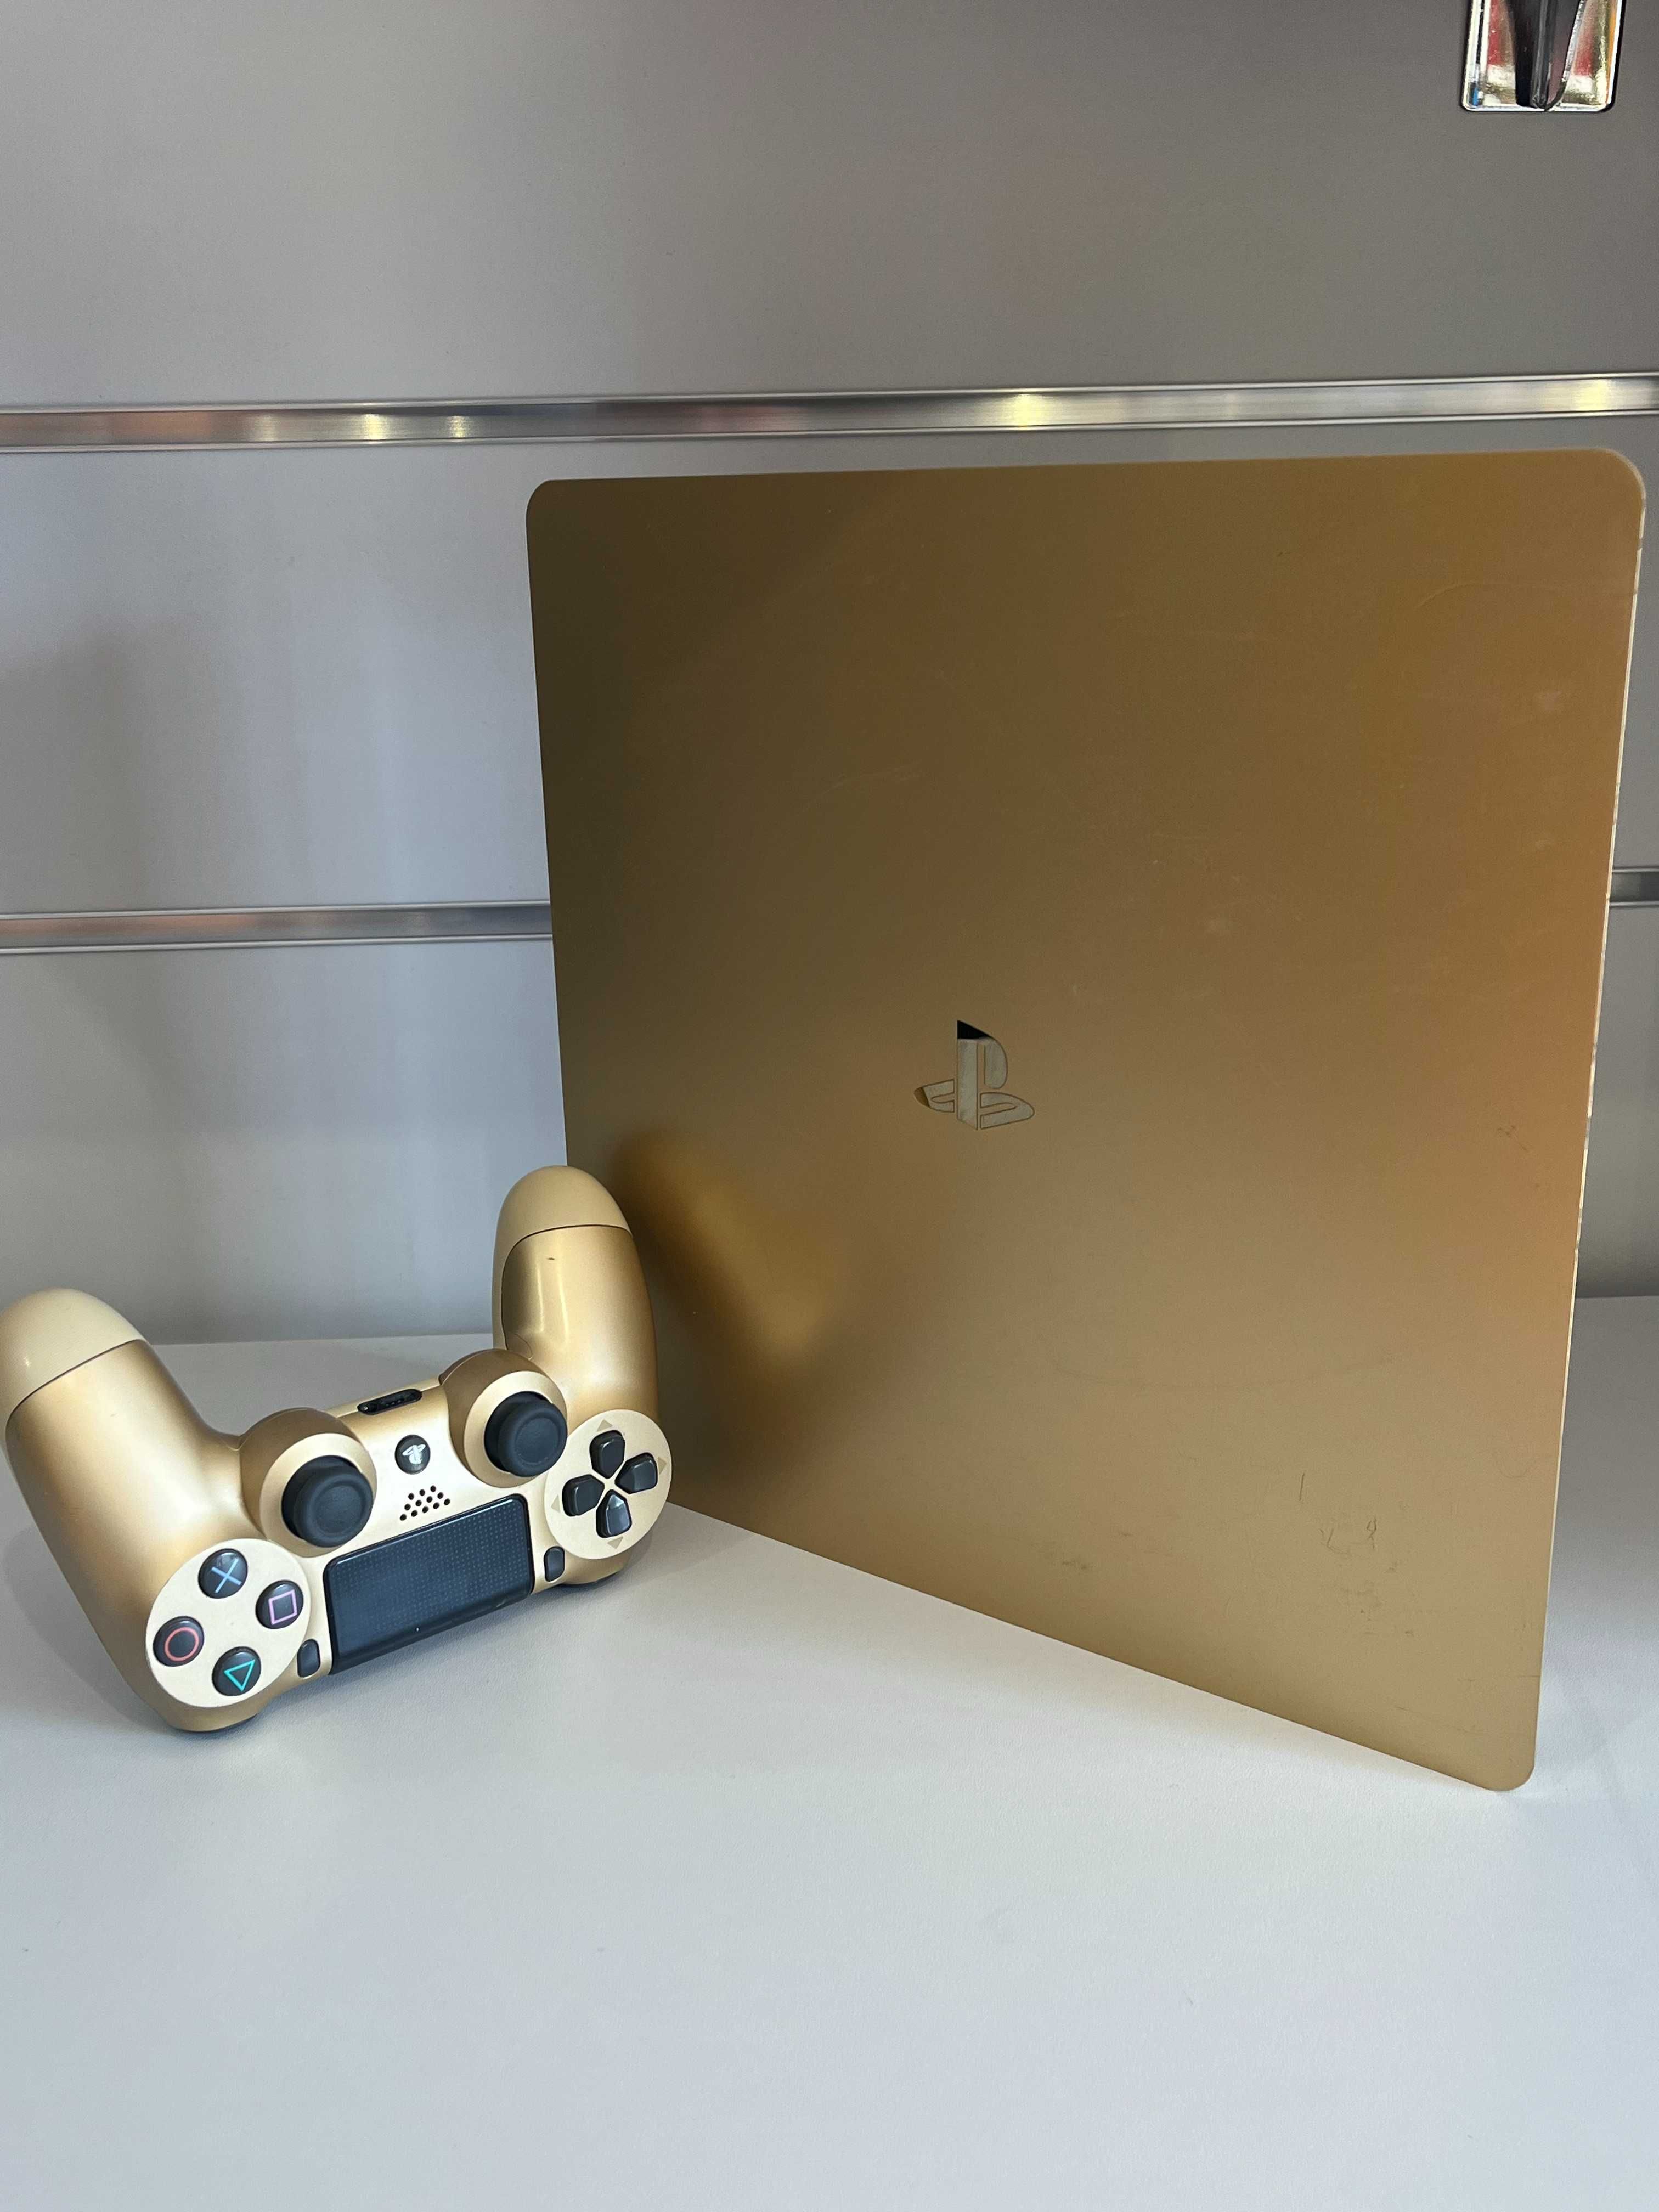 Konsola Sony PS4 Slim Gold FW9.0 !! Lombard Halo Gsm !!